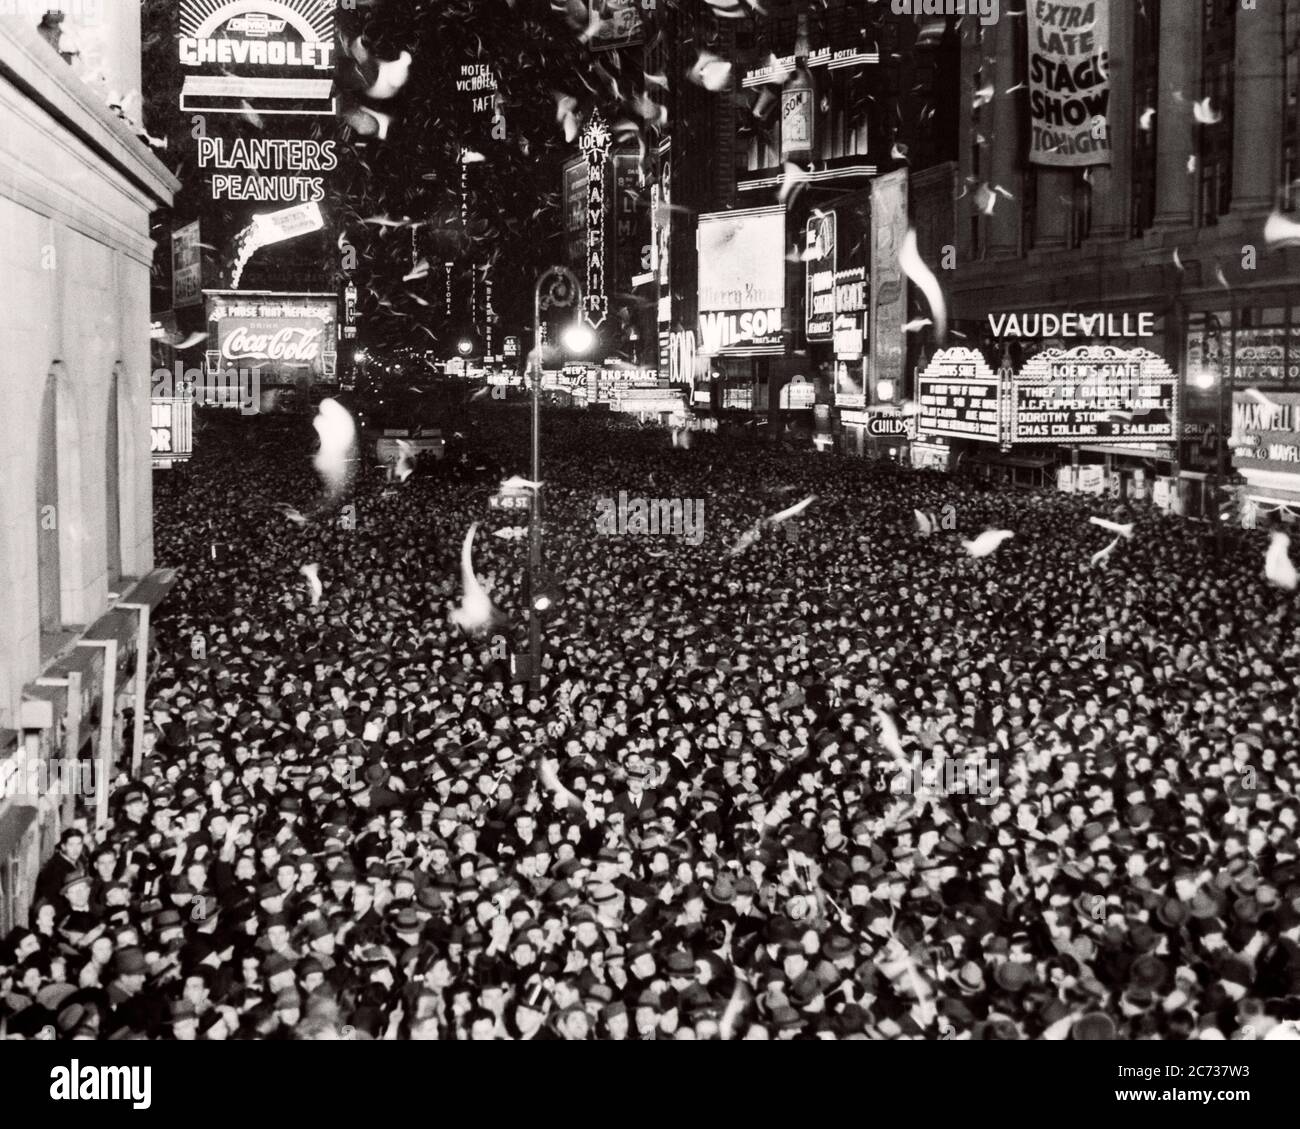 1940s JANUARY 1 1940 JAMMED PACKED CROWD OF PEOPLE MEN WOMEN TEENAGERS CELEBRATING NEW YEAR TIMES SQUARE NEW YORK USA - asp hp5951 ASP001 HARS HAPPINESS HIGH ANGLE DECEMBER 31 JANUARY EXCITEMENT GOTHAM OF NYC NEW YORK CITIES NEW YORK CITY TIMES SQUARE YEAR'S BROADWAY JAMMED MARQUEES TOGETHERNESS BIG APPLE BLACK AND WHITE JANUARY 1 NEW YEAR NEW YEARS OLD FASHIONED Stock Photo